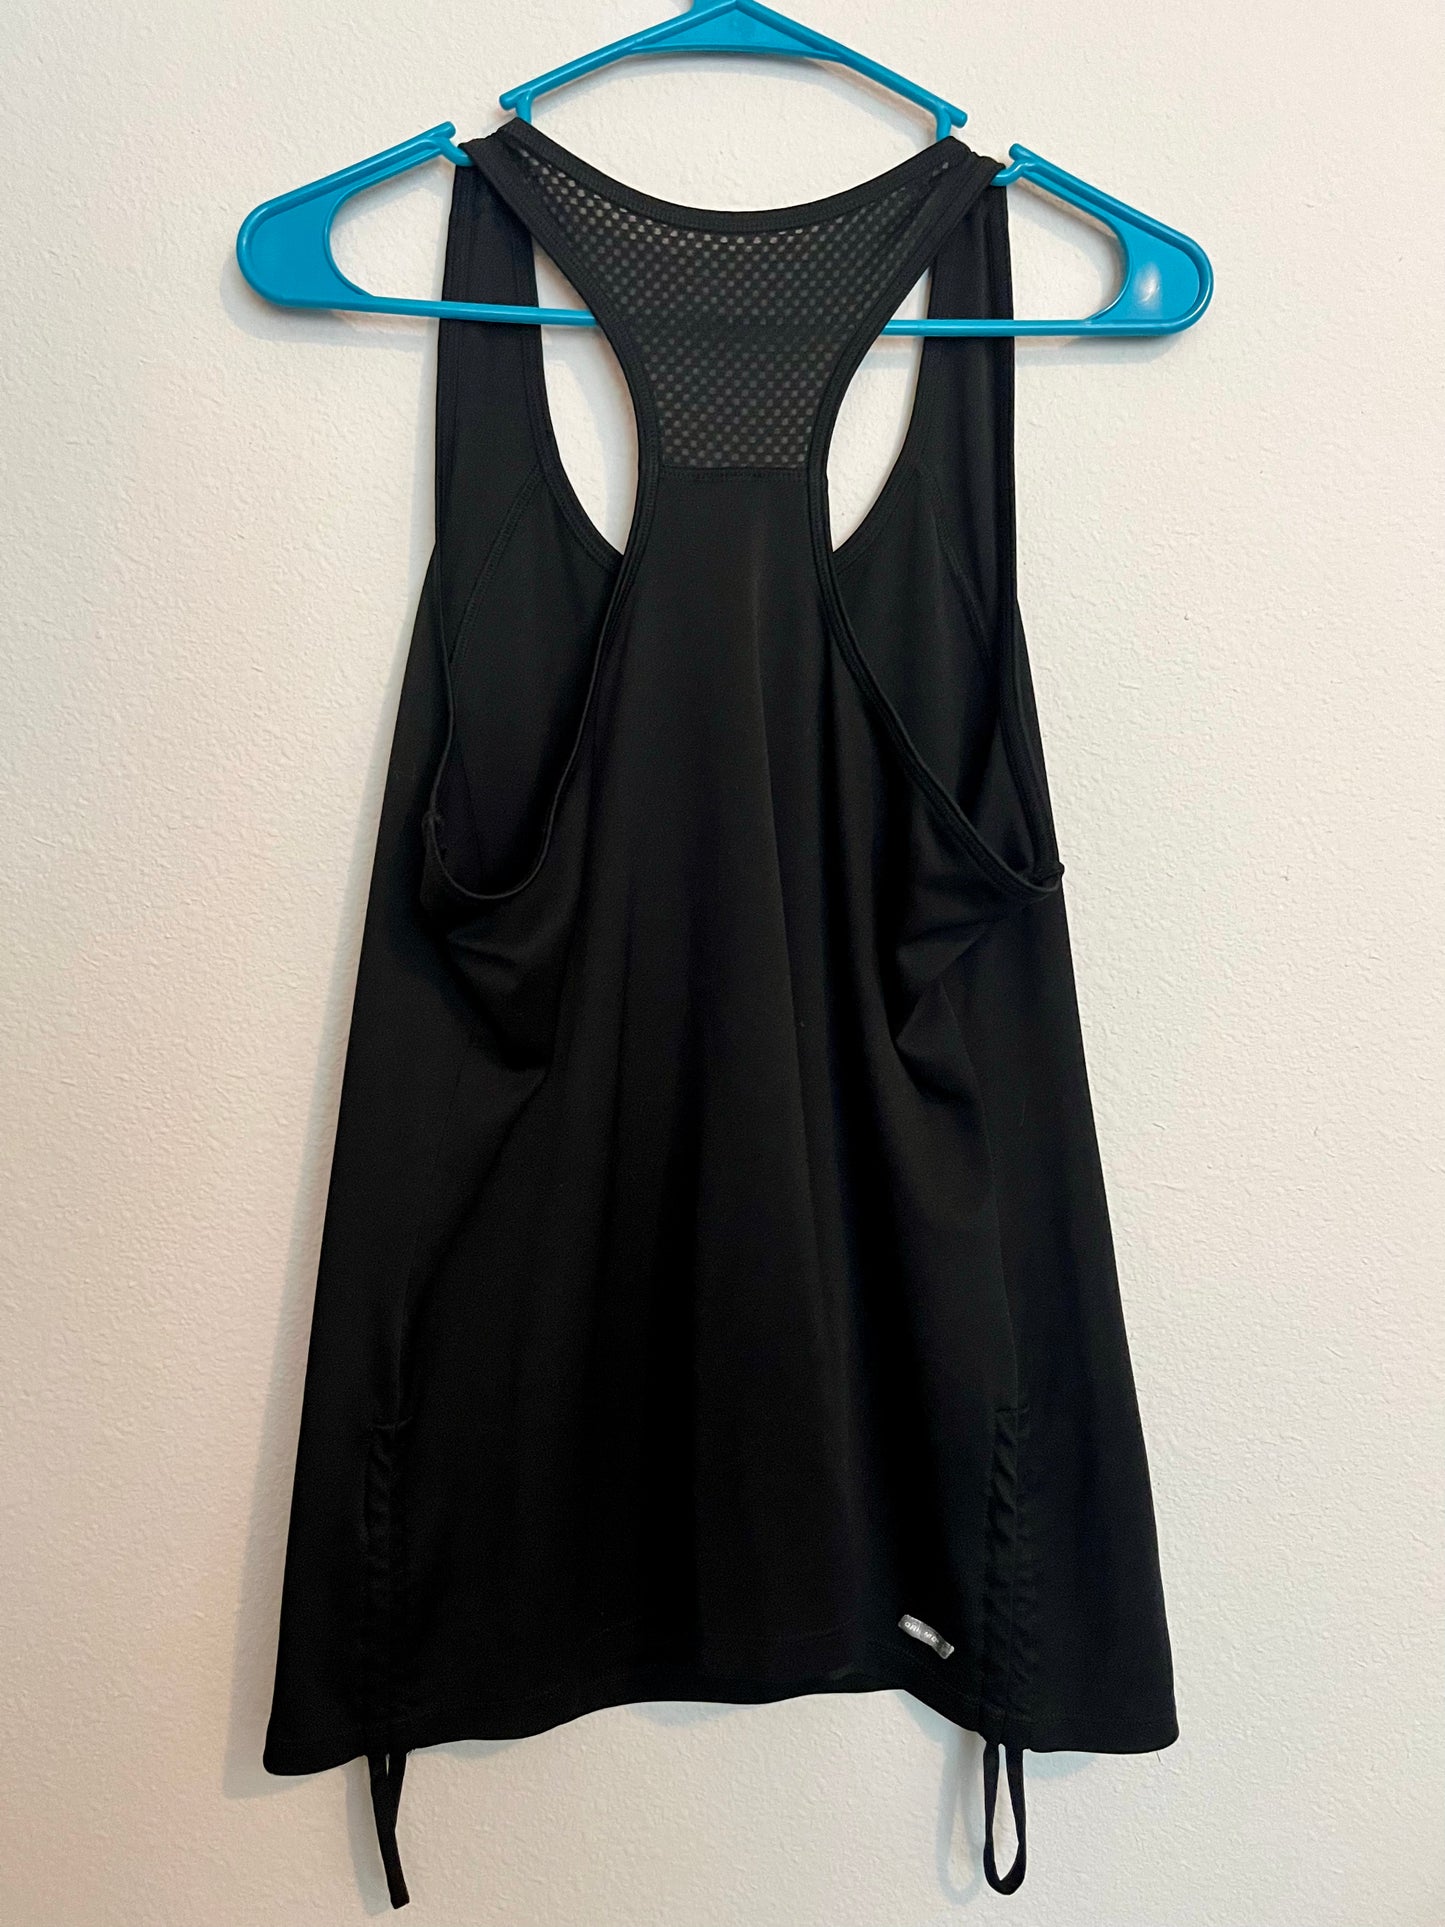 Danskin Athletic Top, Size Medium - Tales from the Tangle